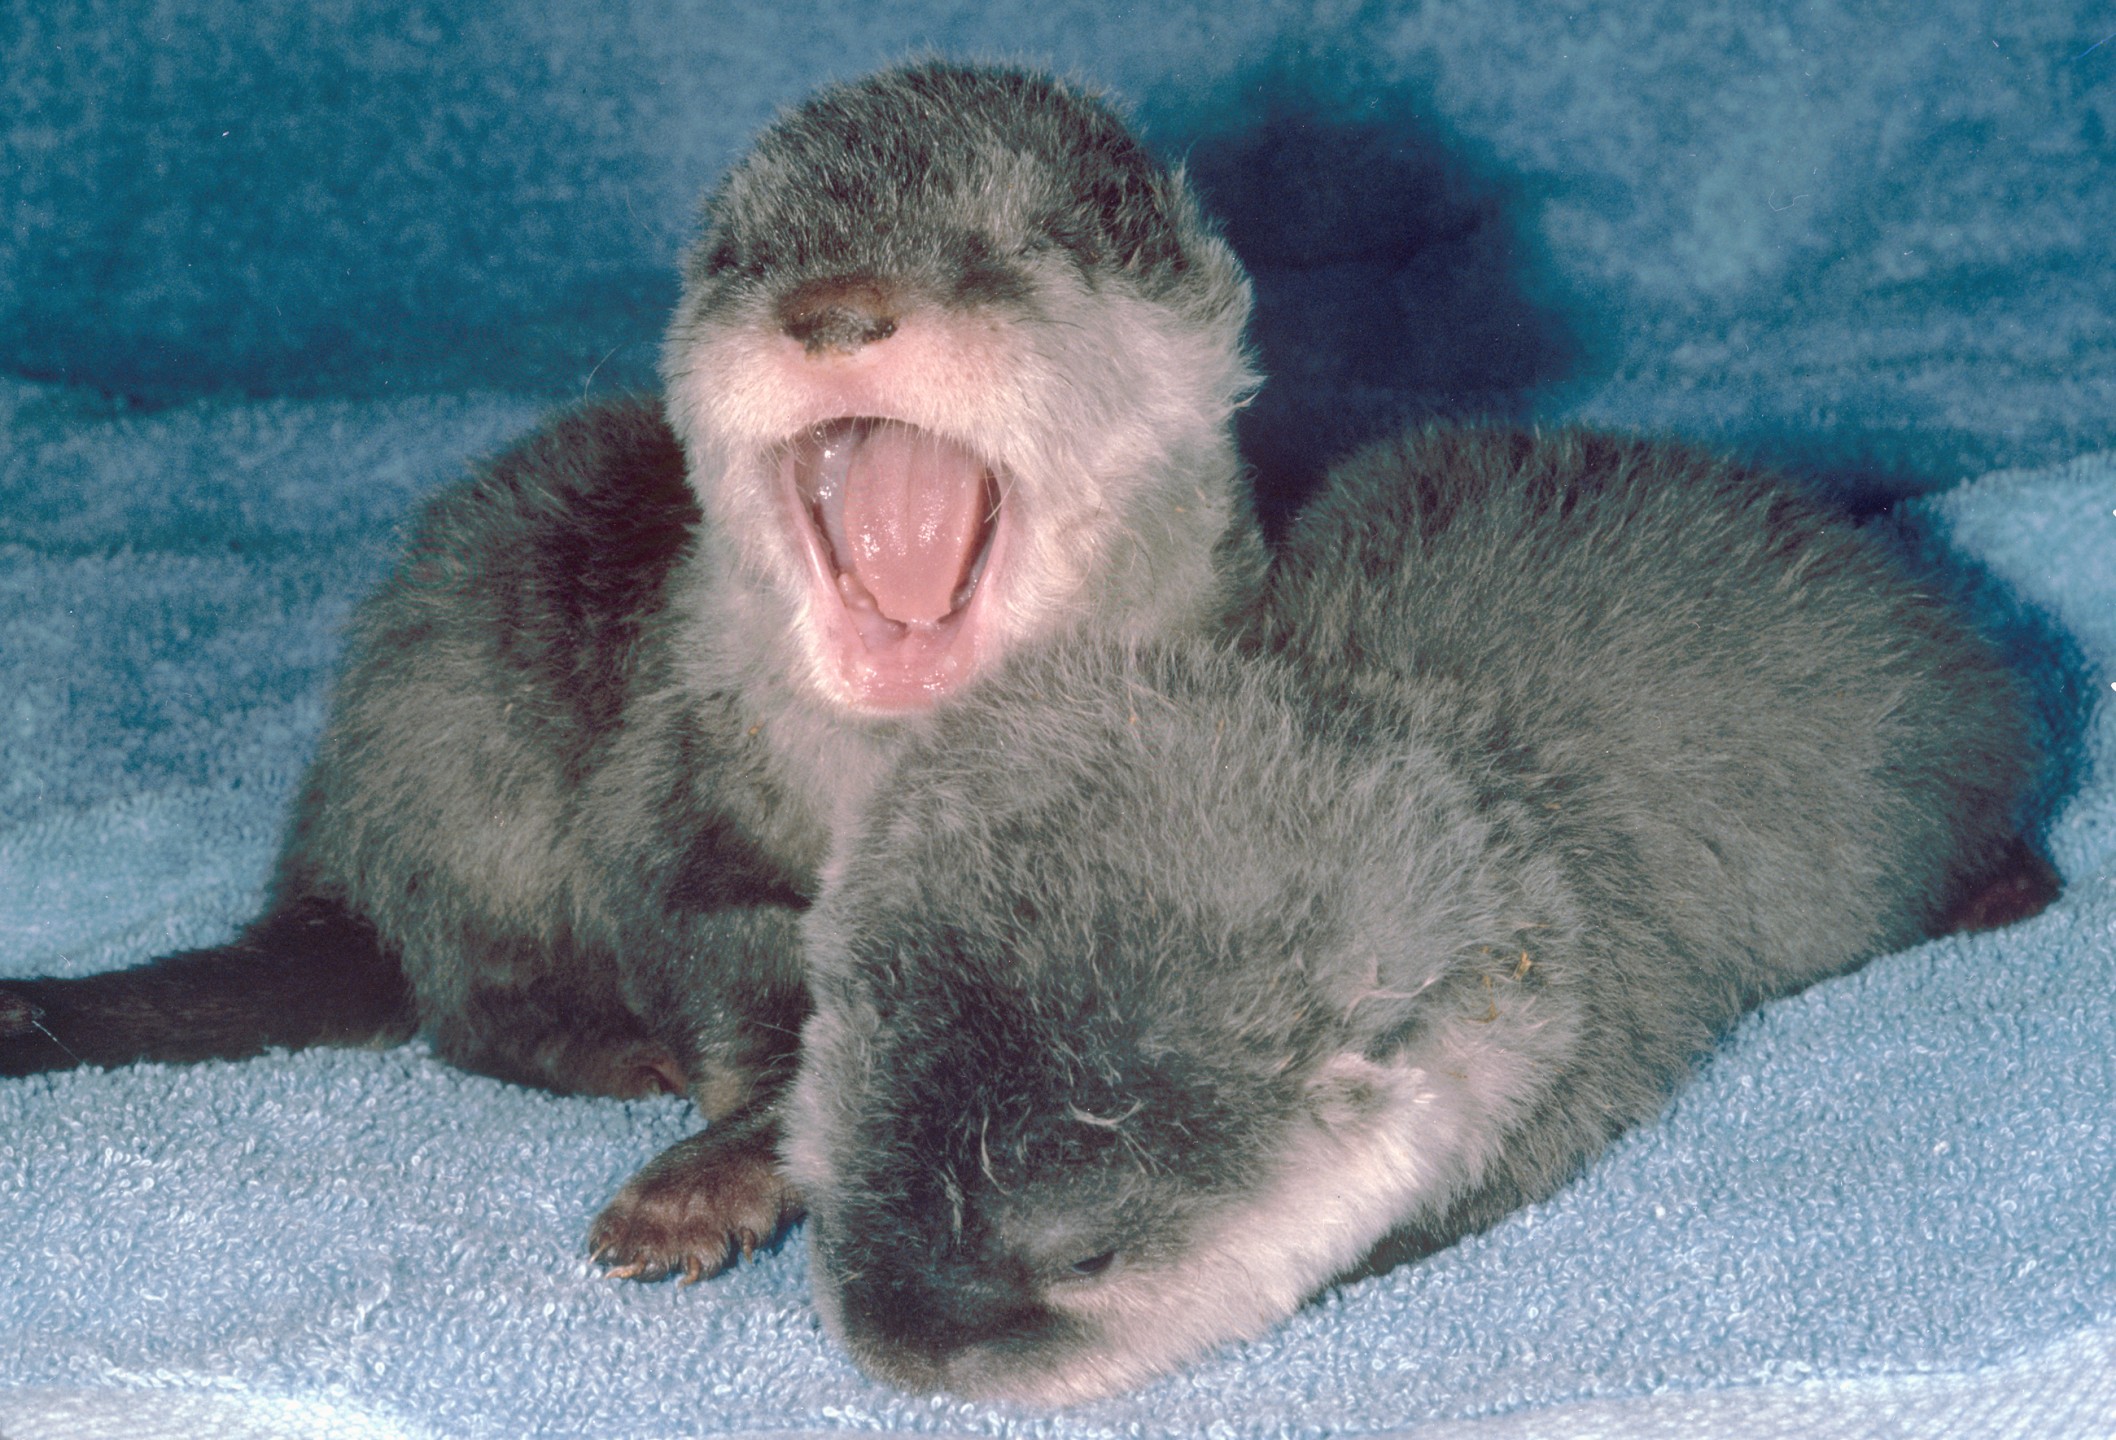 Osborn and Osgood otters surprised their mother and the staff when they arrived in the world on December 10, 1980. Their mother, Renee, and two males, Eric and Todd, all three Asian small-clawed otters, had only been living together in the Children's Zoo's new 